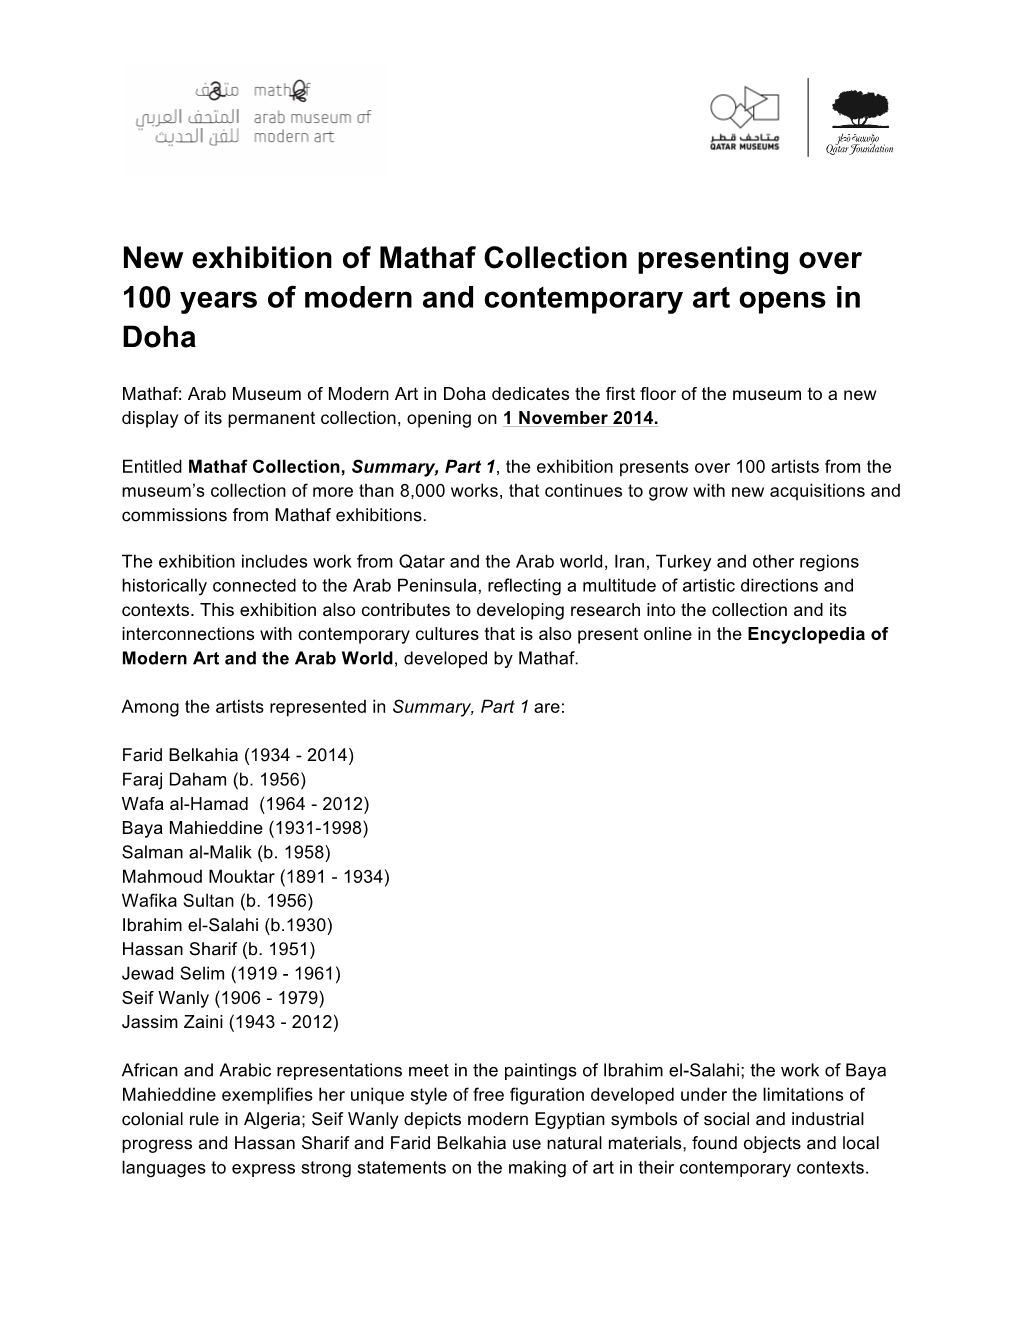 New Exhibition of Mathaf Collection Presenting Over 100 Years of Modern and Contemporary Art Opens in Doha